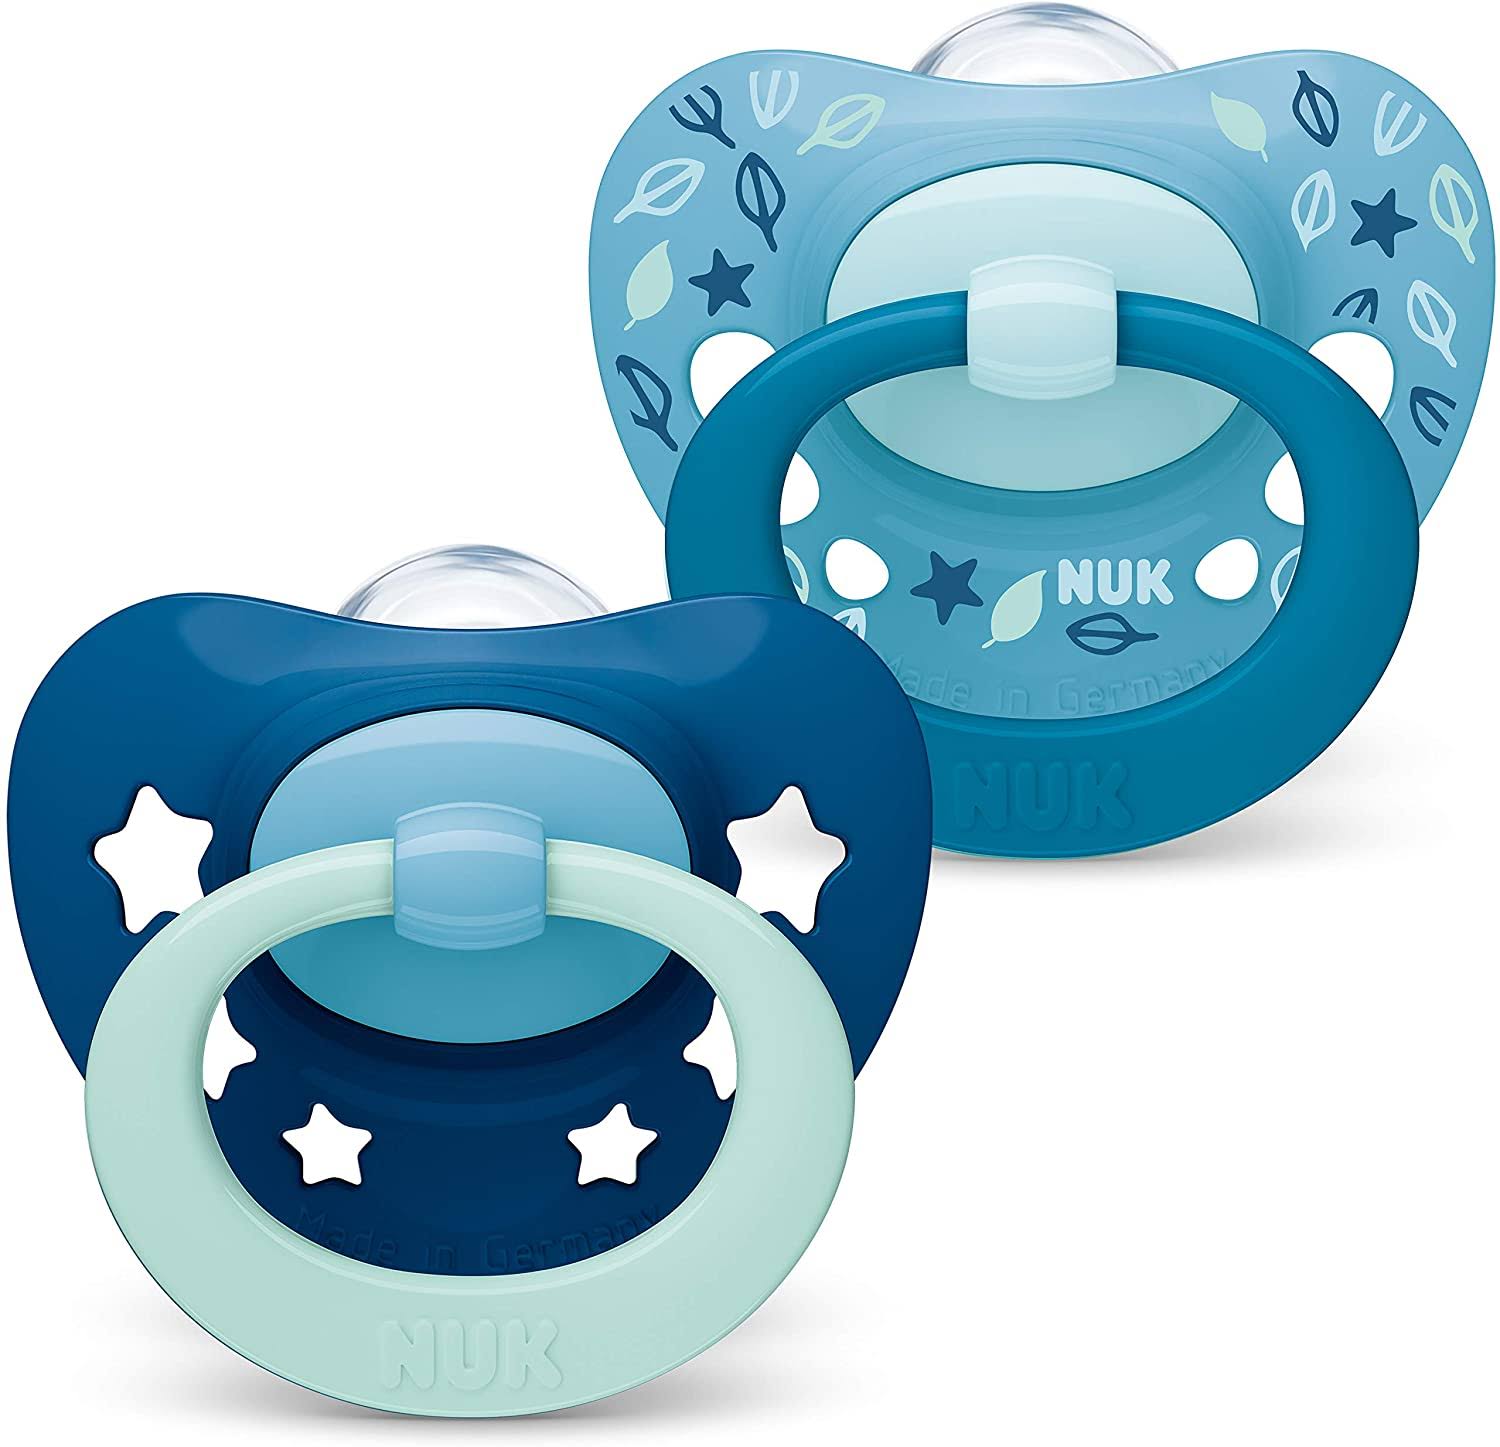 NUK Signature Silicone Soothers - Blue